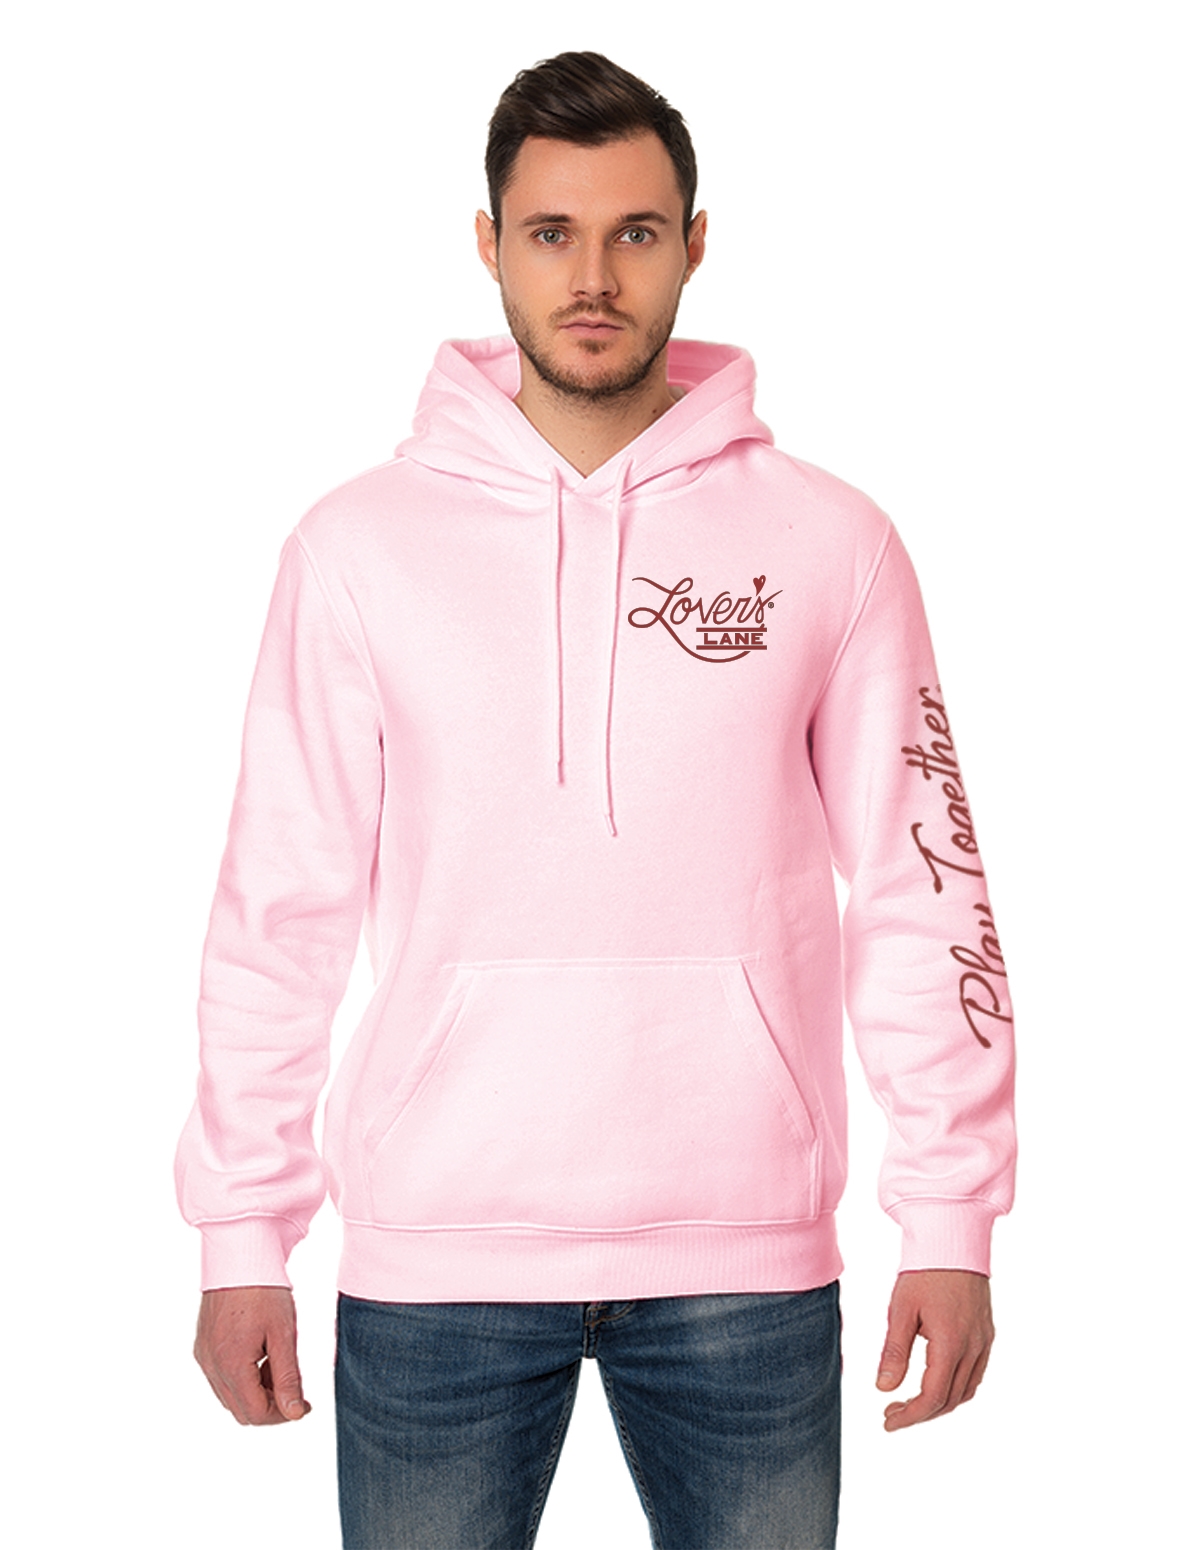 alternate image for Lovers Lane Play Together Hoodie